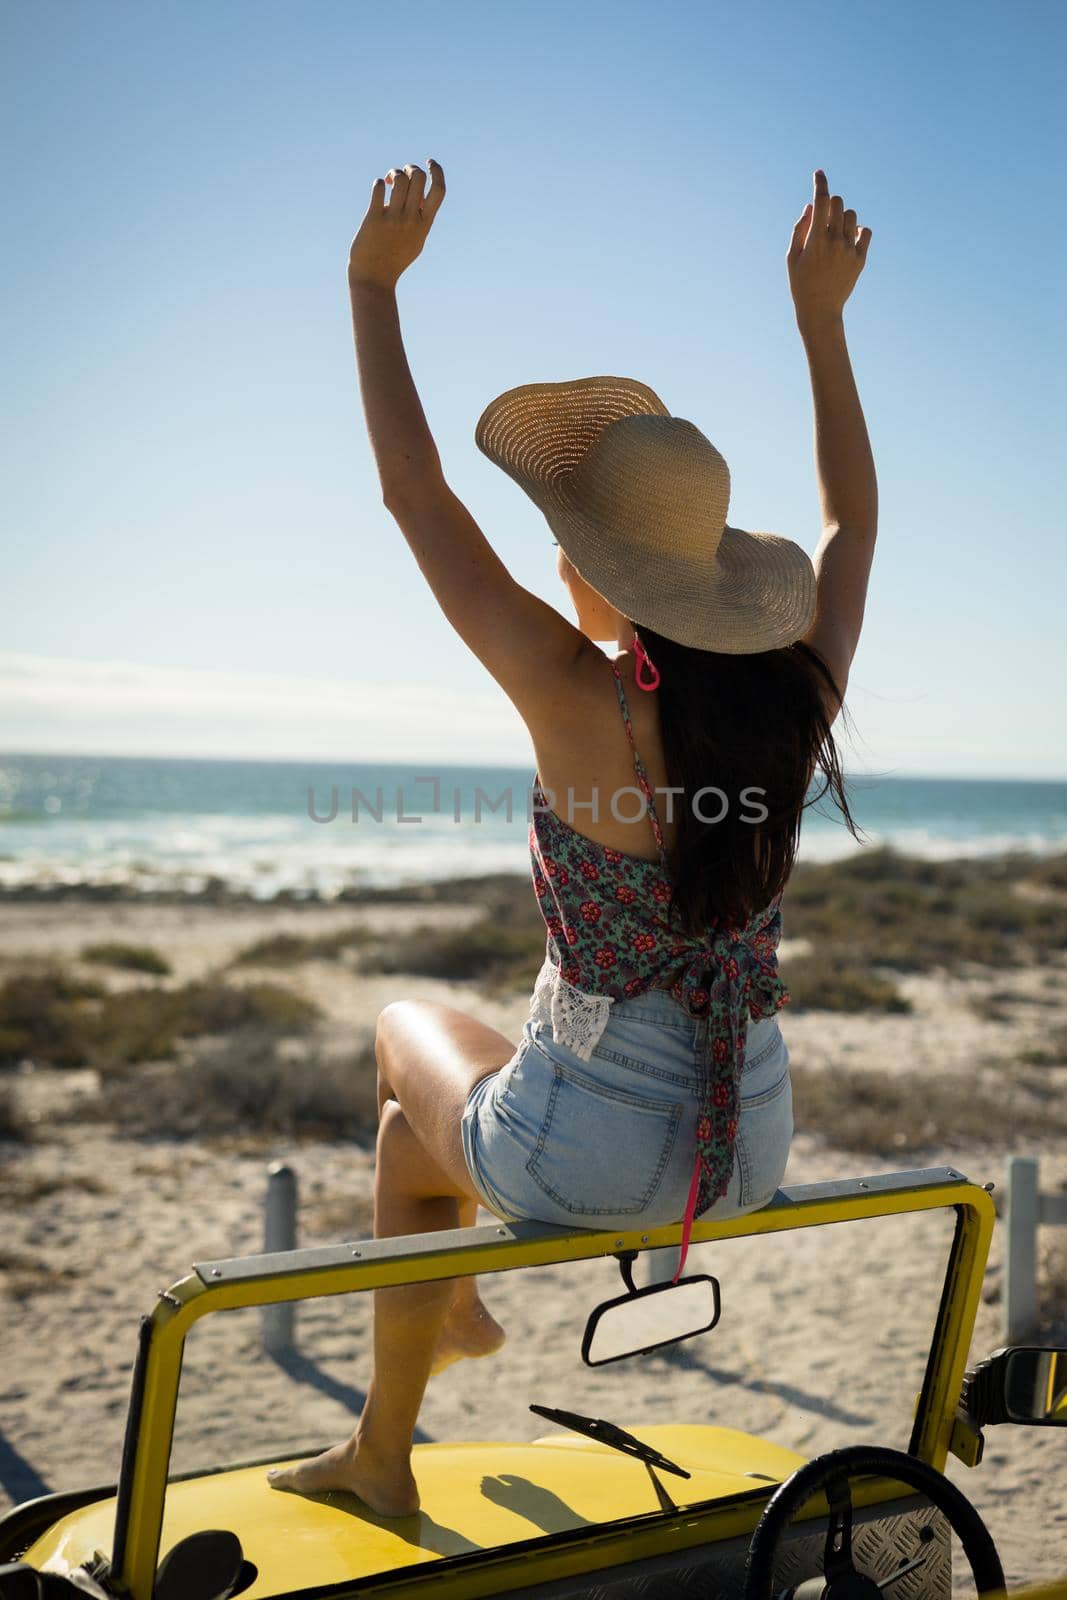 Caucasian woman sitting on beach buggy by the sea wearing straw hat looking toward sea with hands up. beach break on summer holiday road trip.